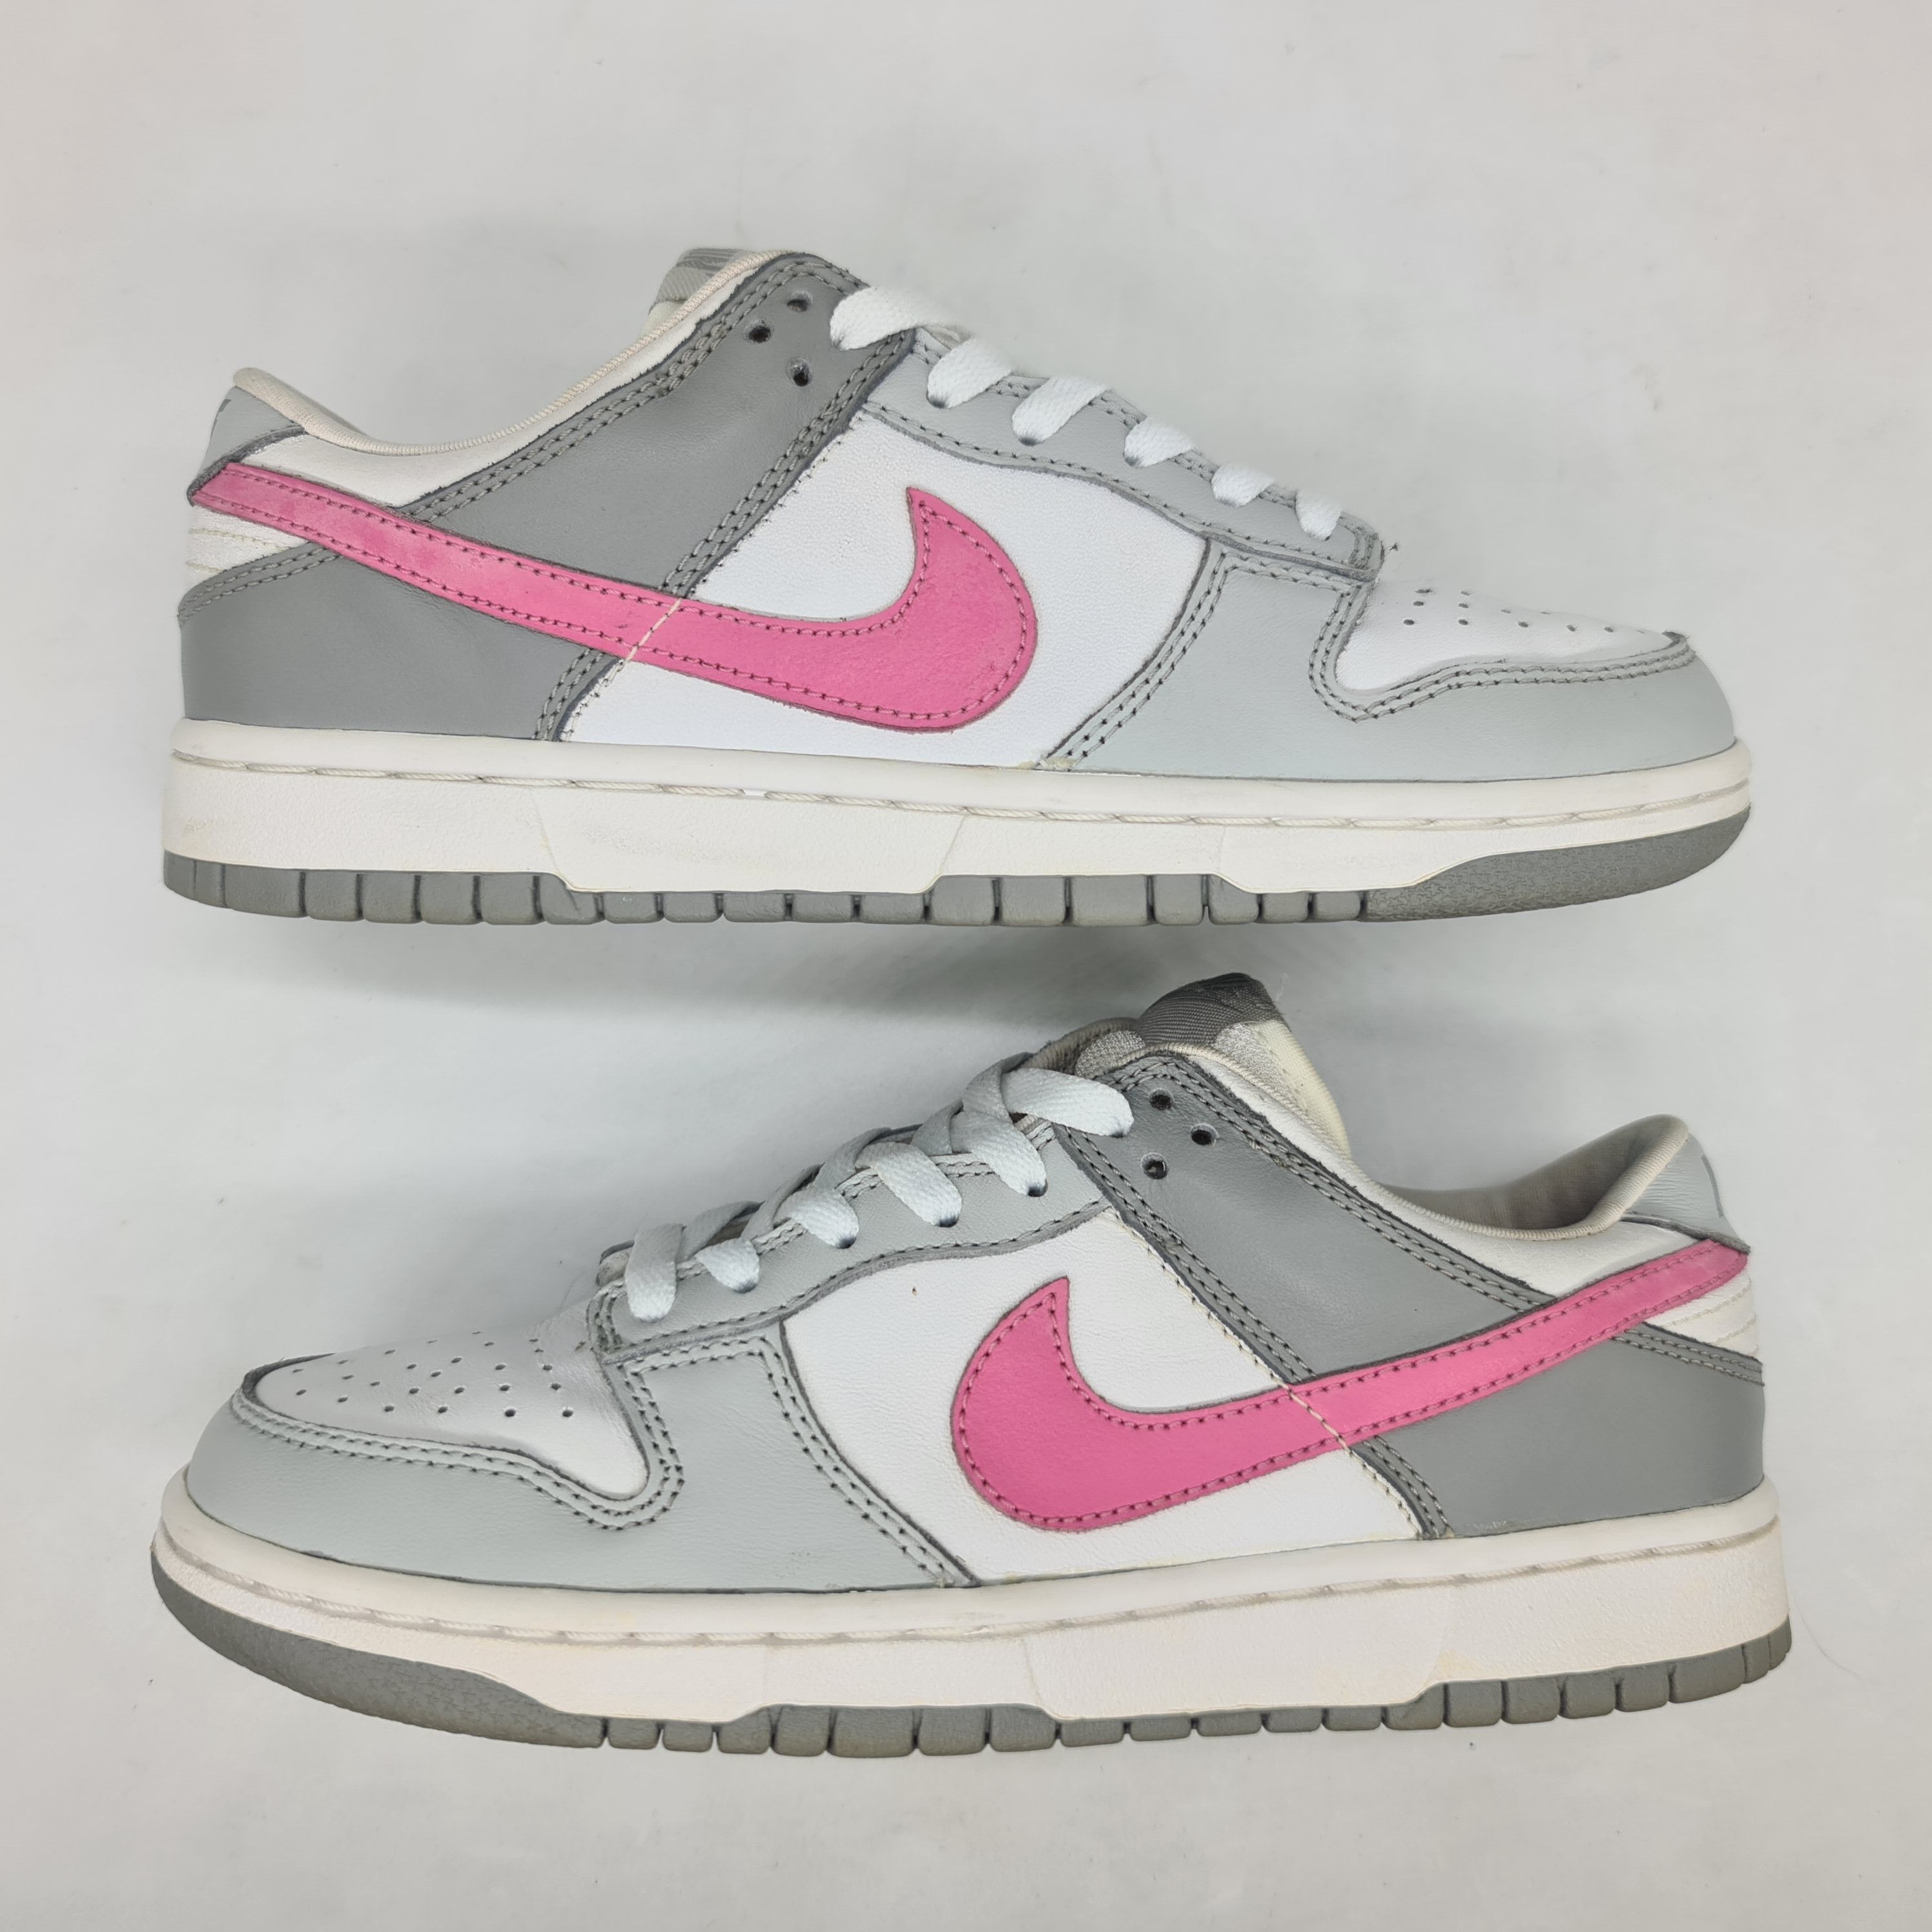 Nike - 2004 W's Dunk Low Pro Pink Neutral Gray - 5